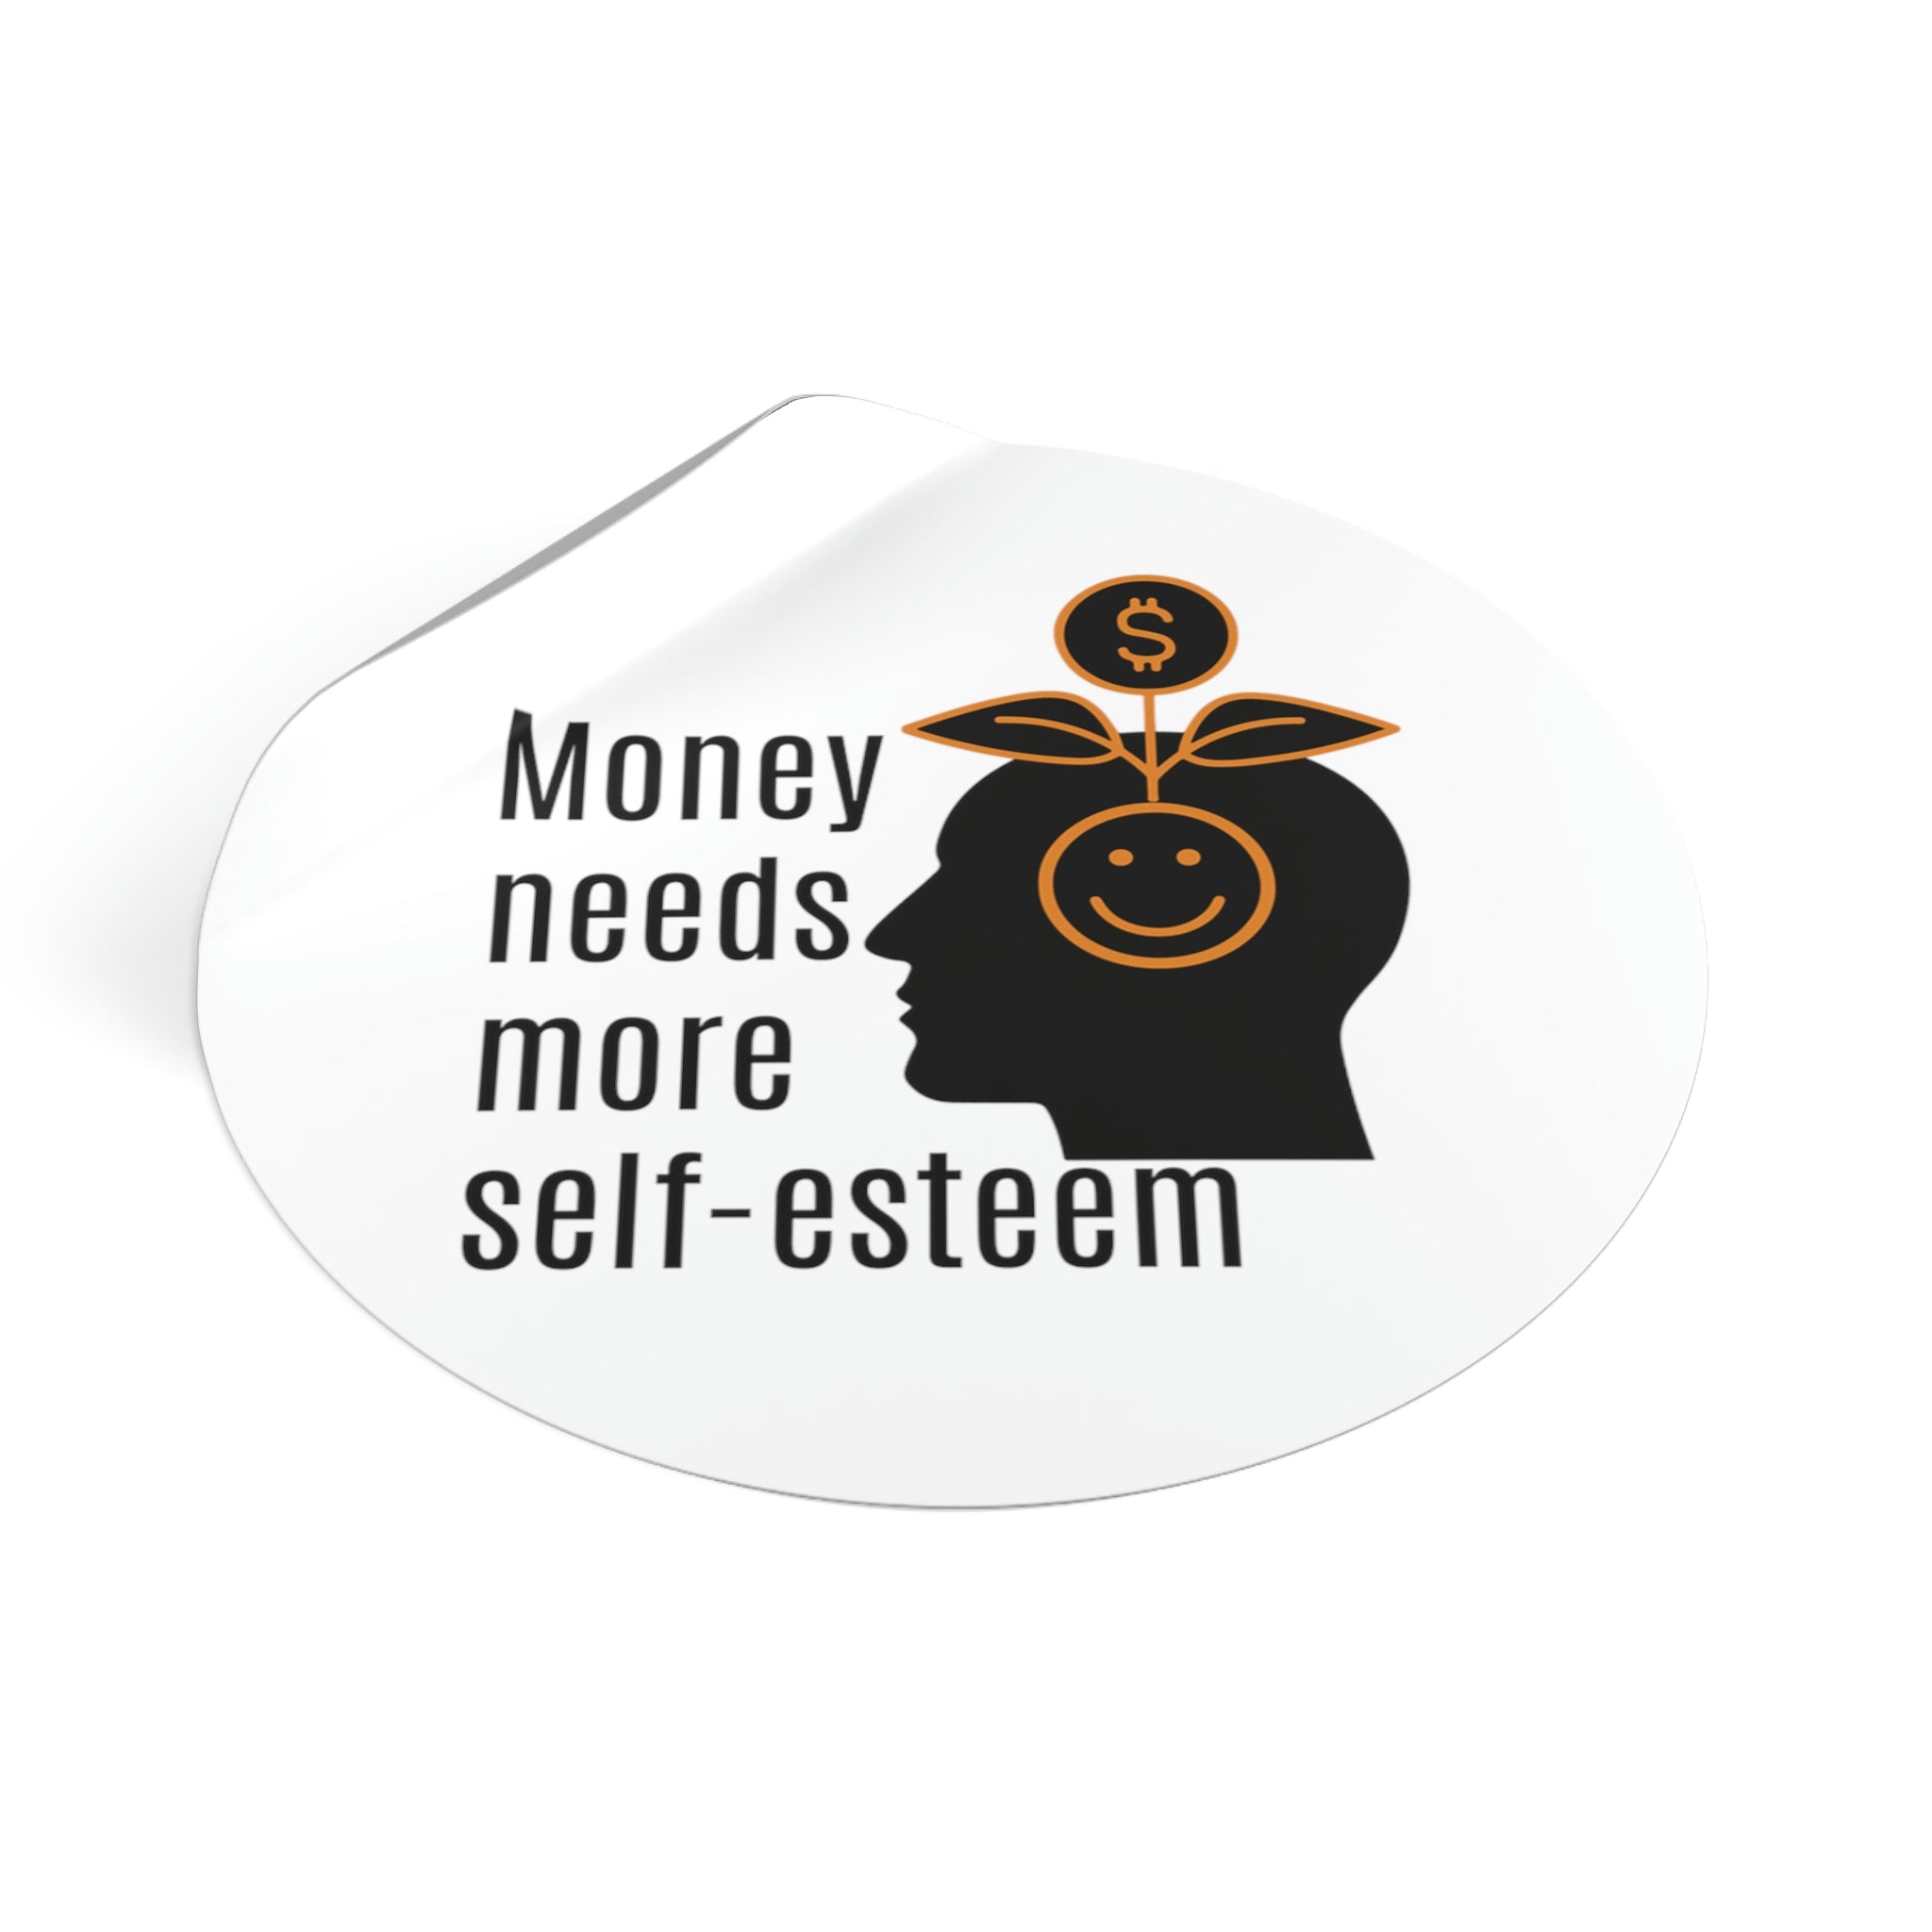 Money needs more self-esteem | Small business entrepreneur quotes #size_3x3-inches